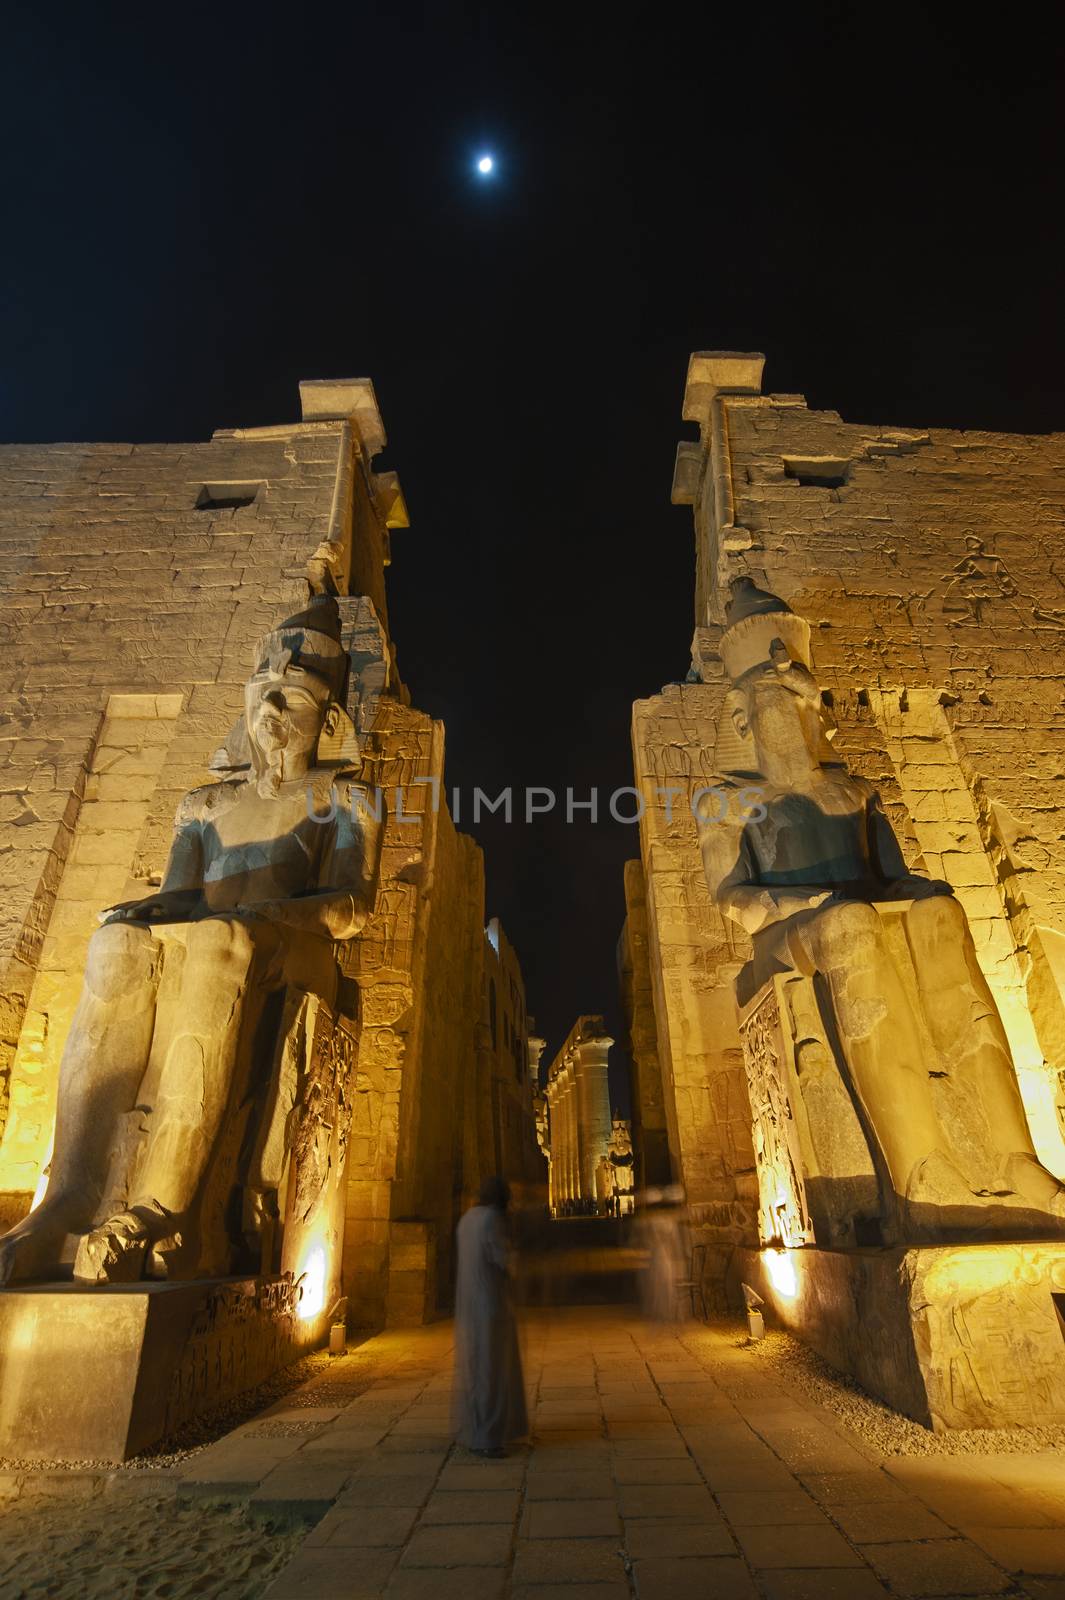 Large statues of Ramses II at entrance pylon to ancient egyptian Luxor Temple lit up during night